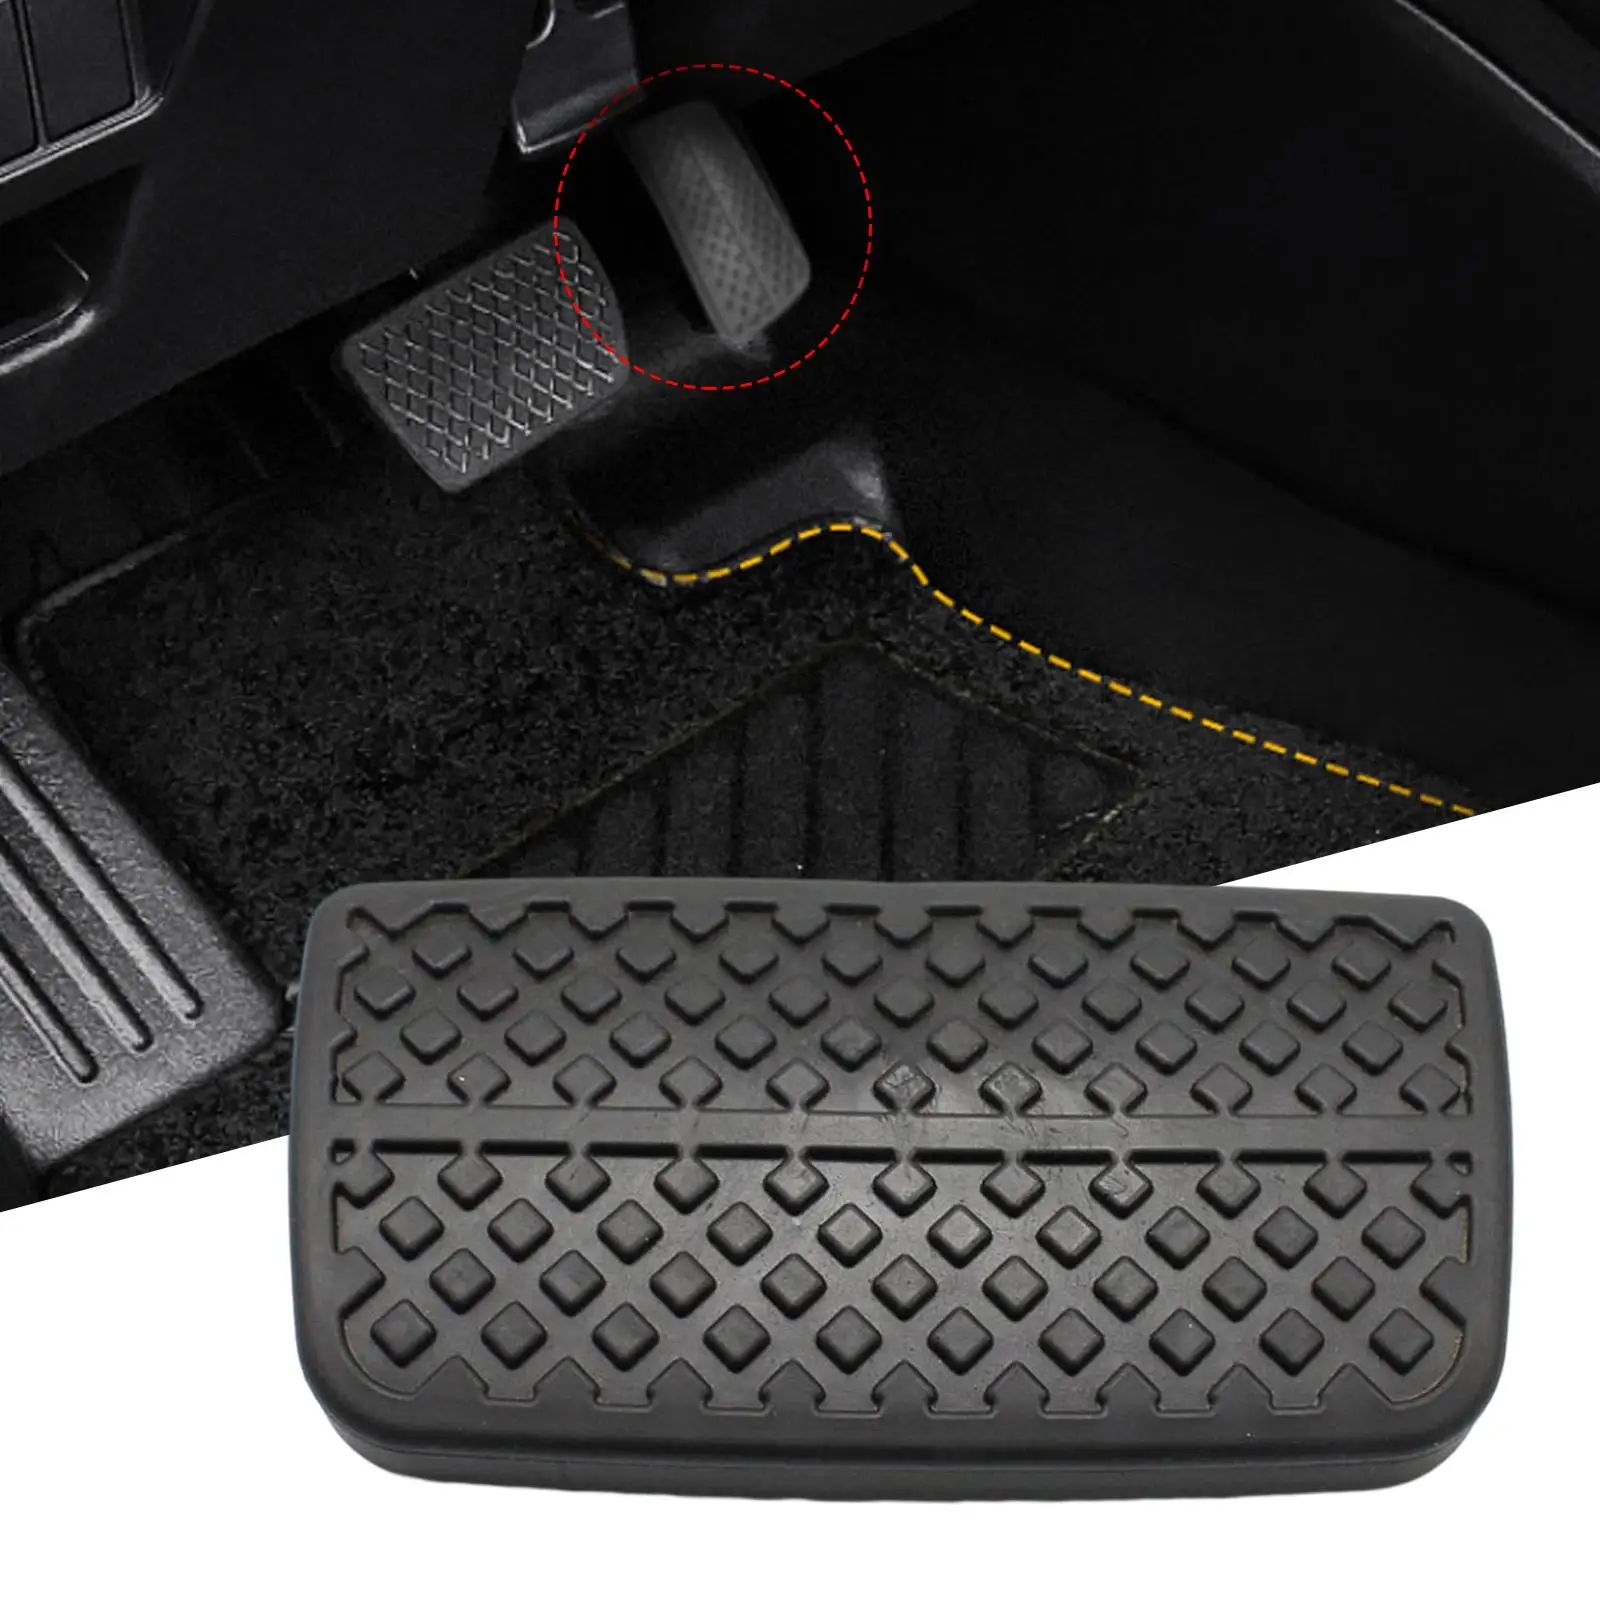 Clutch Brake Pedal Pad 46545-s1F-981 Replaces Black for Honda Fit Jazz Convenient Installation Good Performance Comfortable